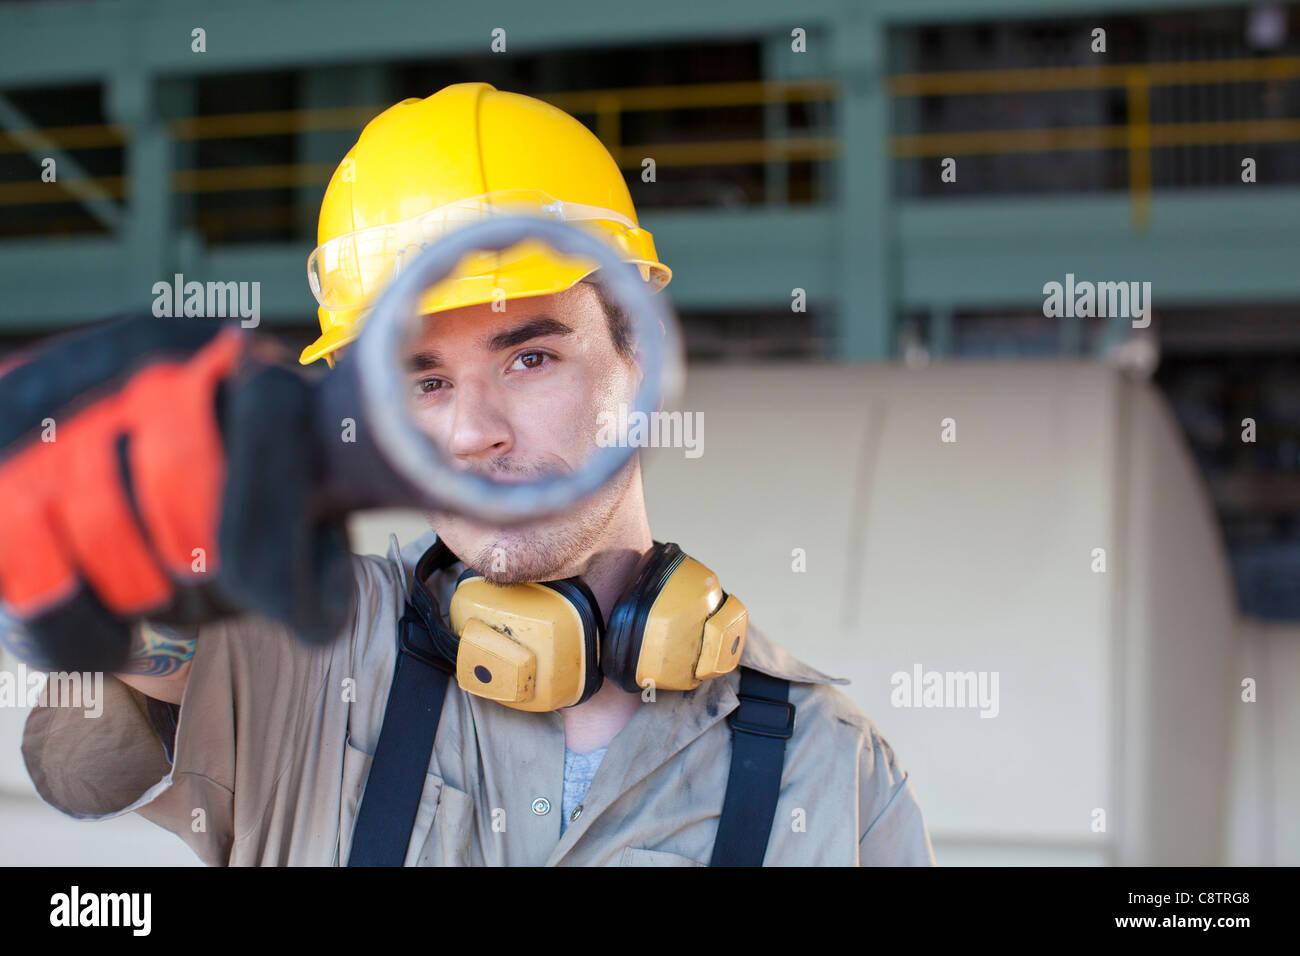 USA, New Mexico, Santa Fe, Portrait of male manual worker holding tool Stock Photo